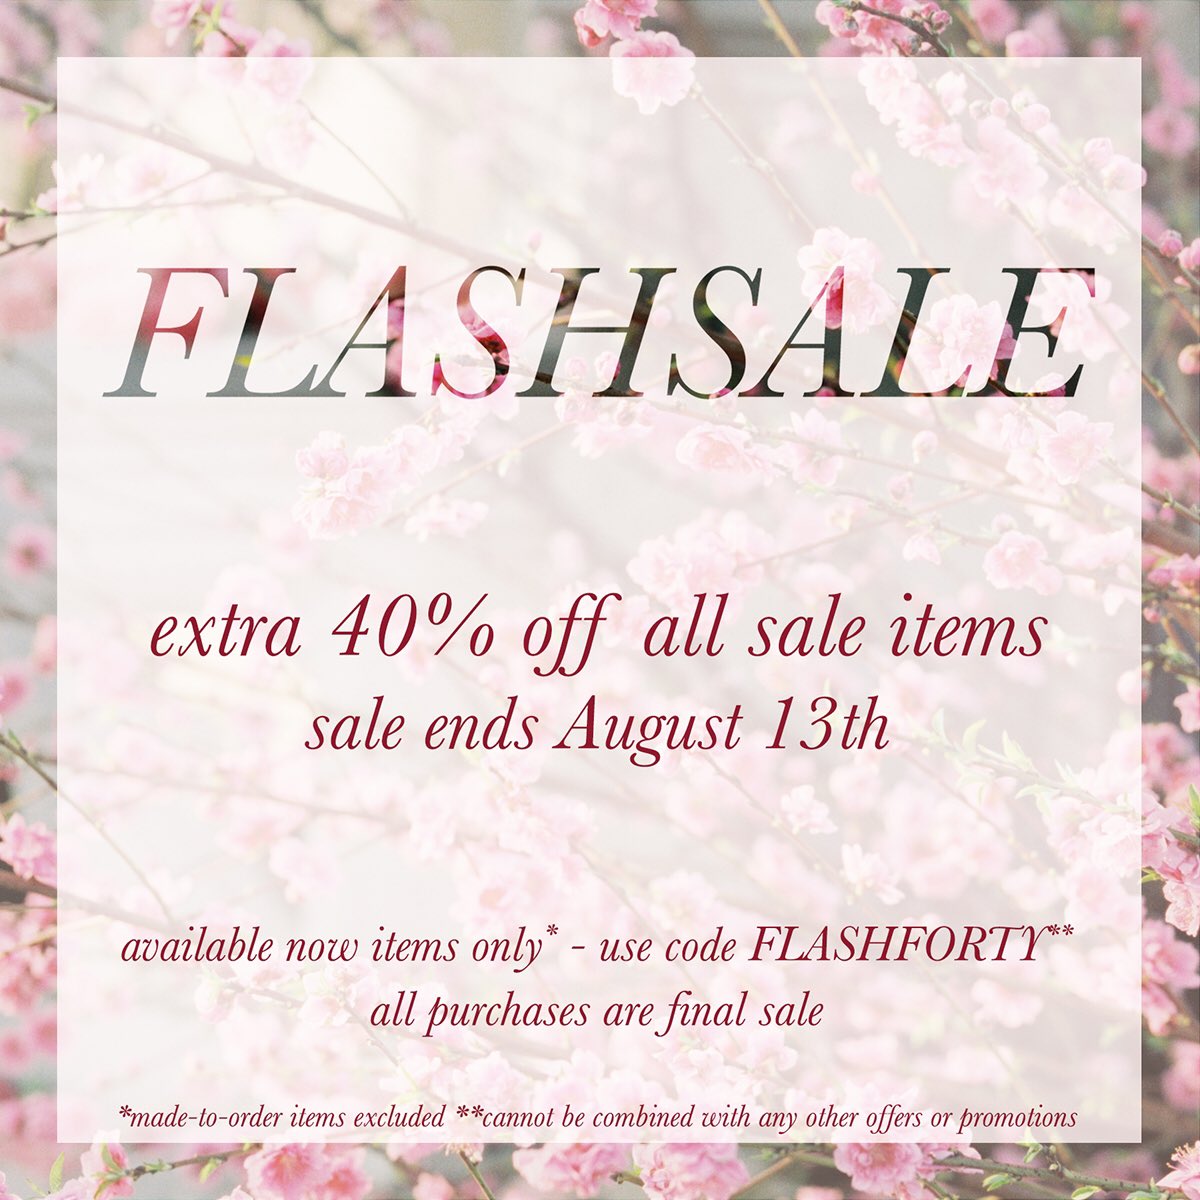 Flash SALE⚡️Shop New Markdowns Now! Extra 40% off all SALE items! Sale ends August 13th! Use promo code FLASHFORTY bit.ly/2urncev